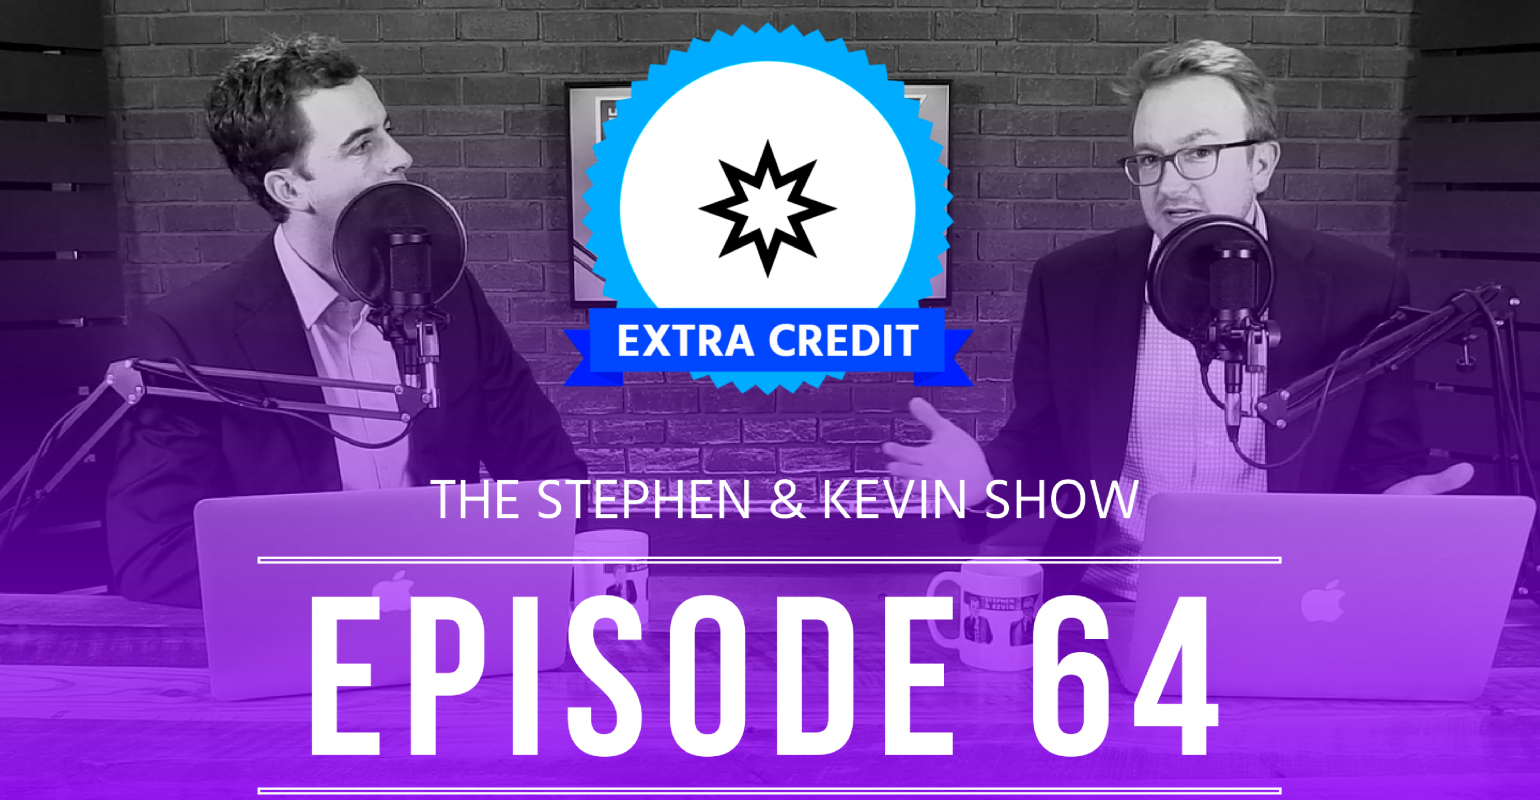 Stephen and Kevin show